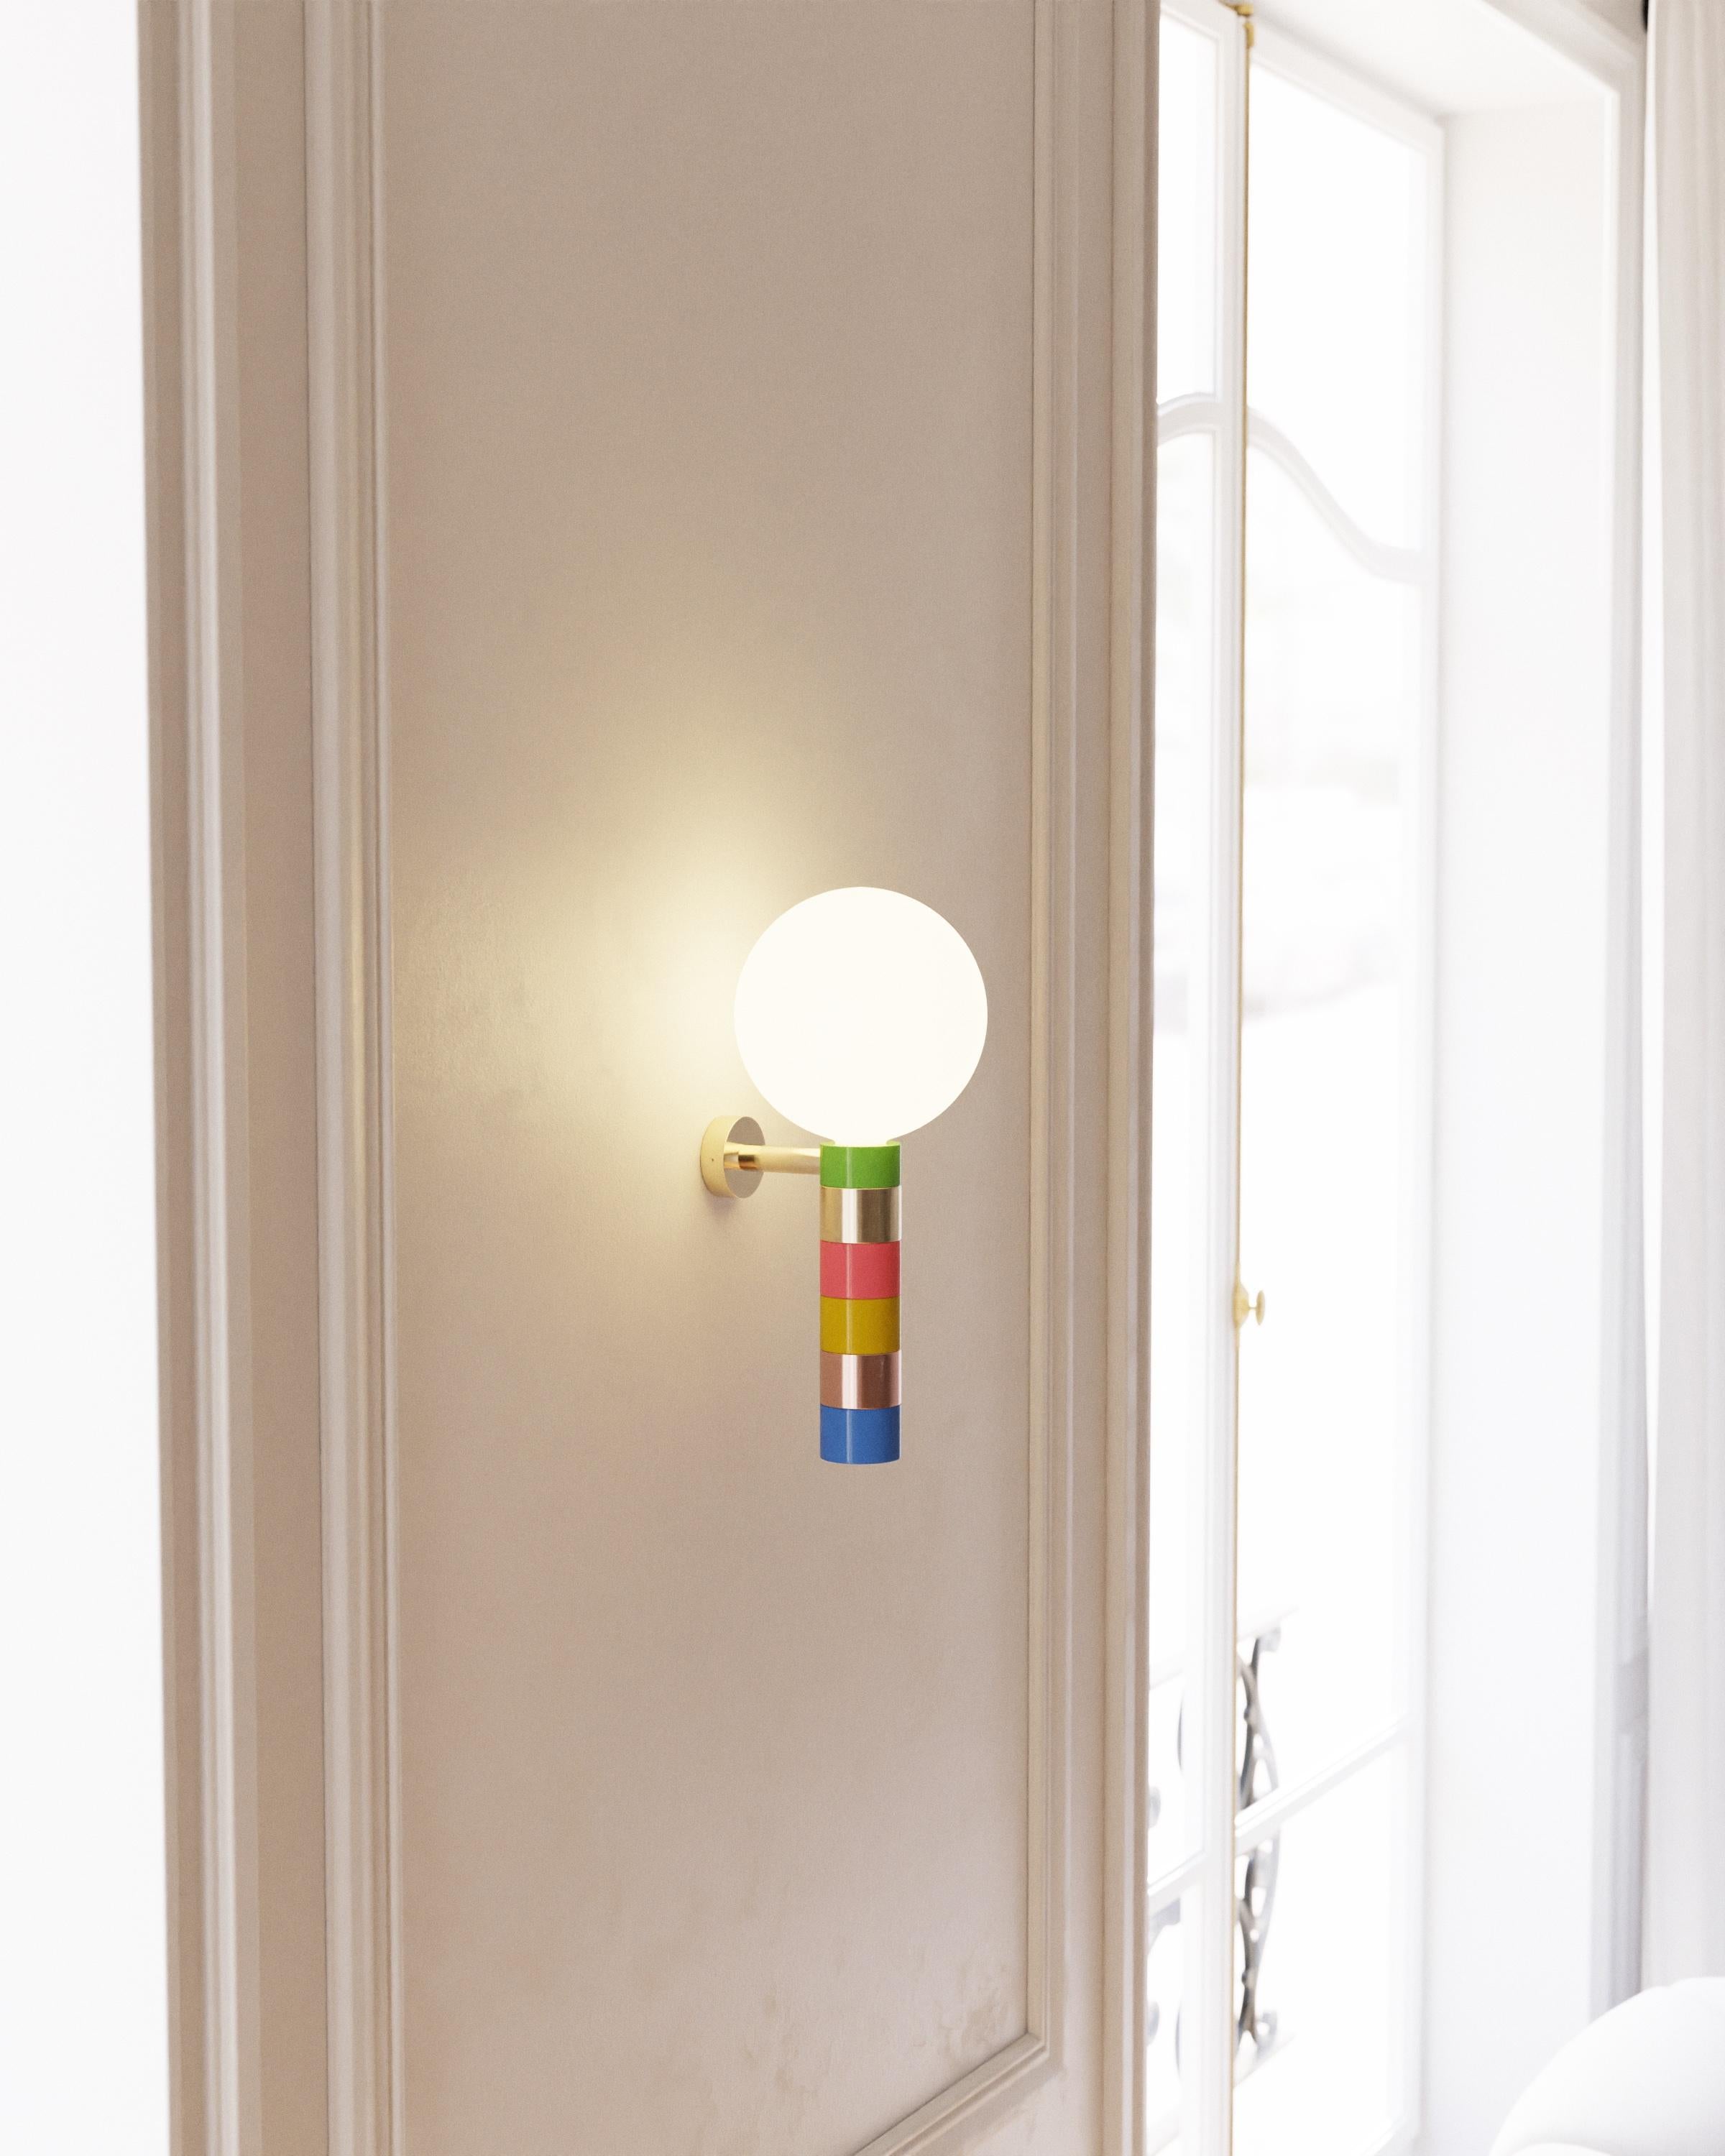 These Donna fit with elegance in a contemporary interior, refined in their lines. 
These small diameter wall lights diffuse an intimate light. They dress a bedroom, a living room or a corridor. 
Comforting lights, with character.

Wall lamp -